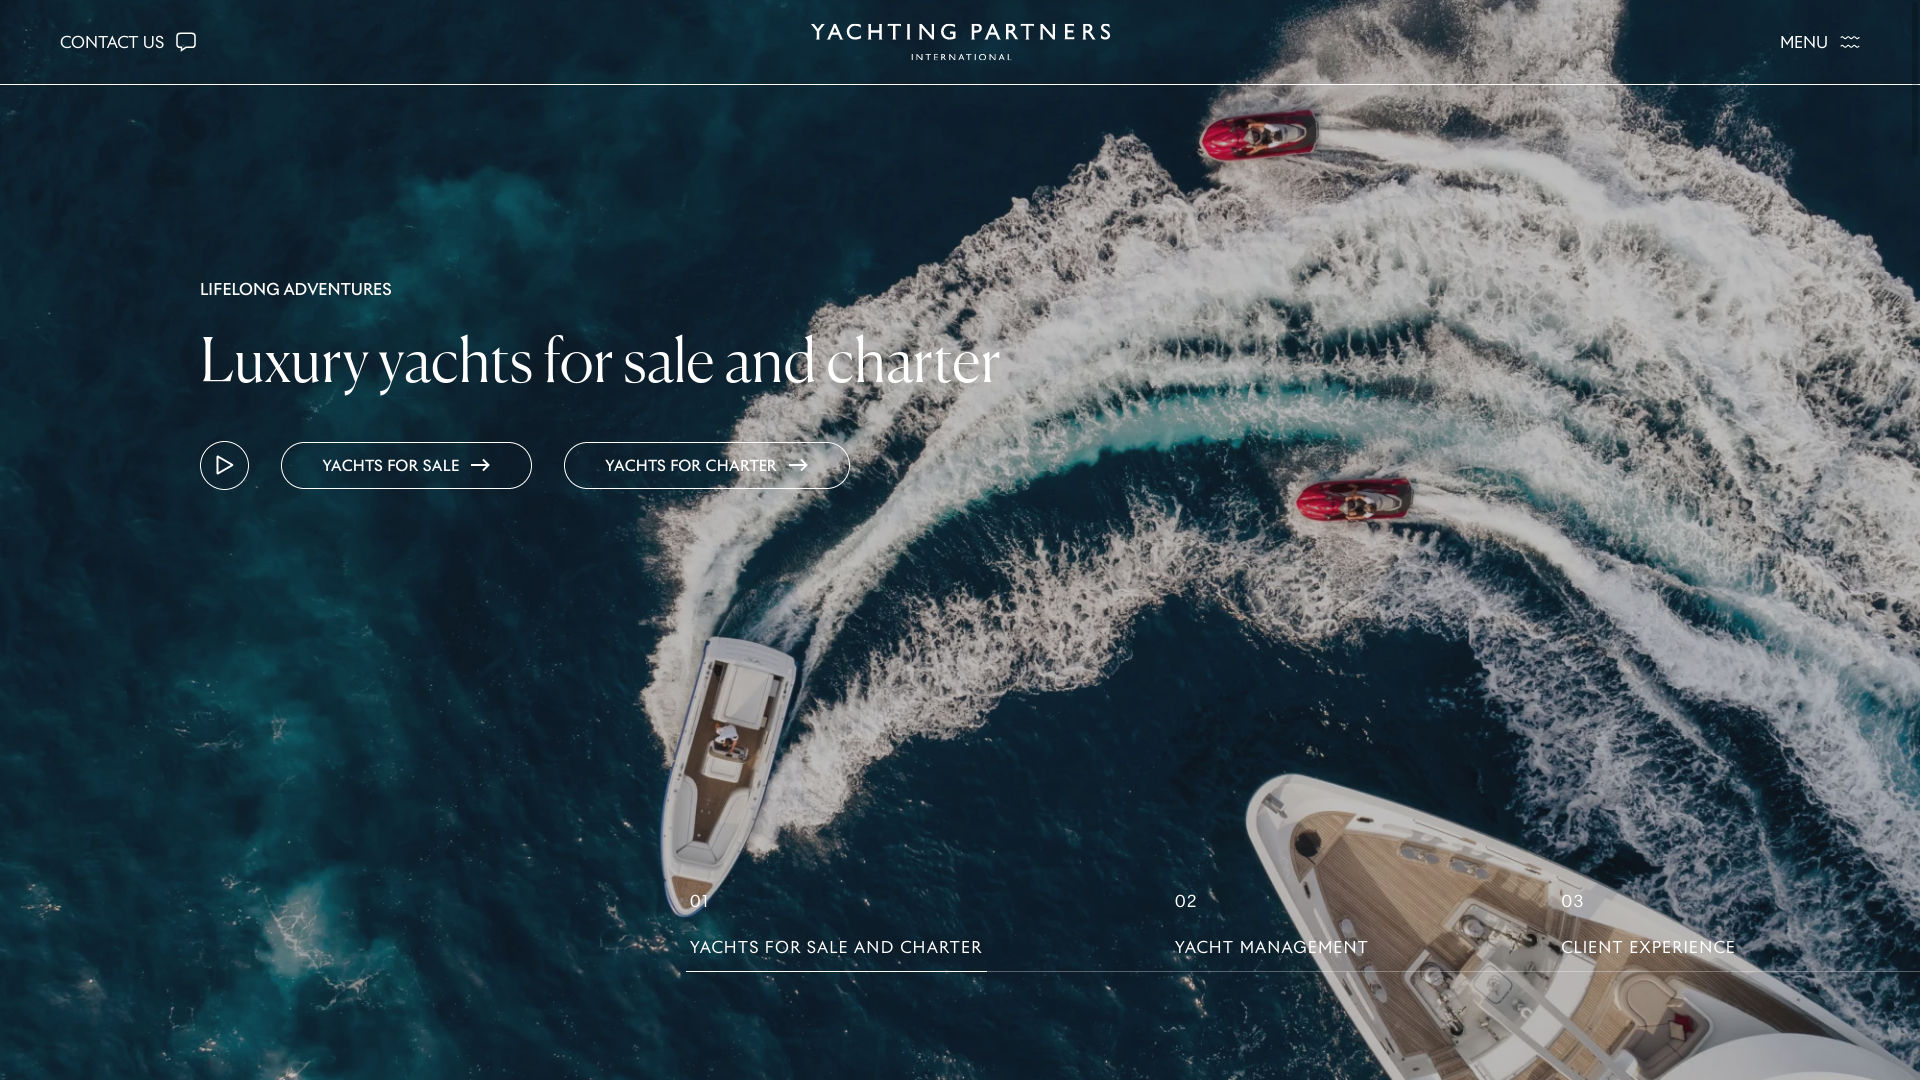 Yachting Partners Inernational home page